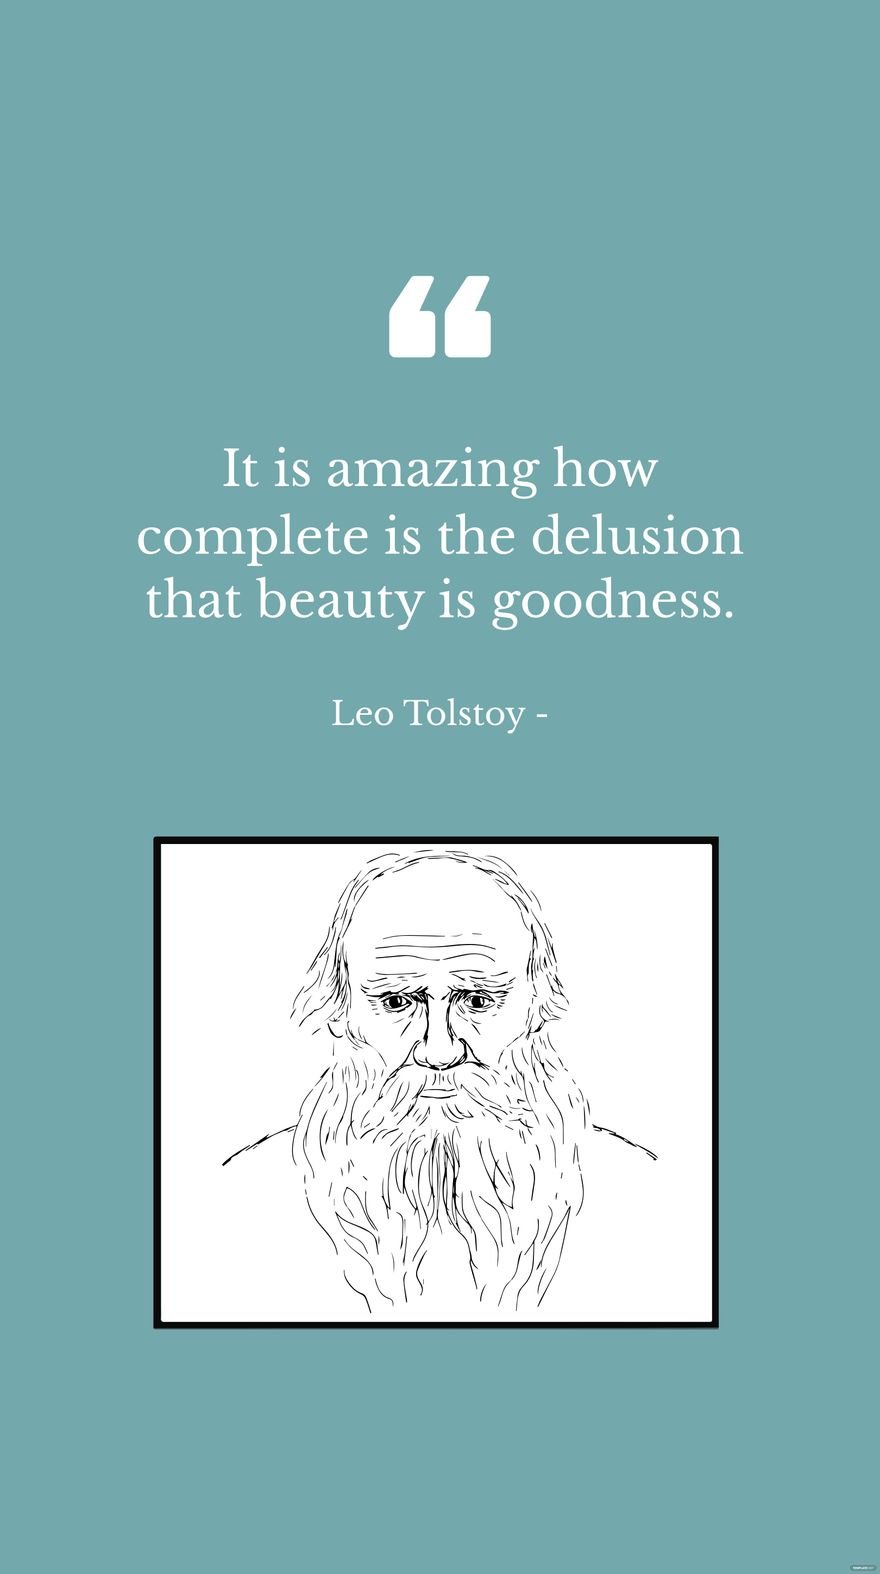 Free Leo Tolstoy - It is amazing how complete is the delusion that beauty is goodness.